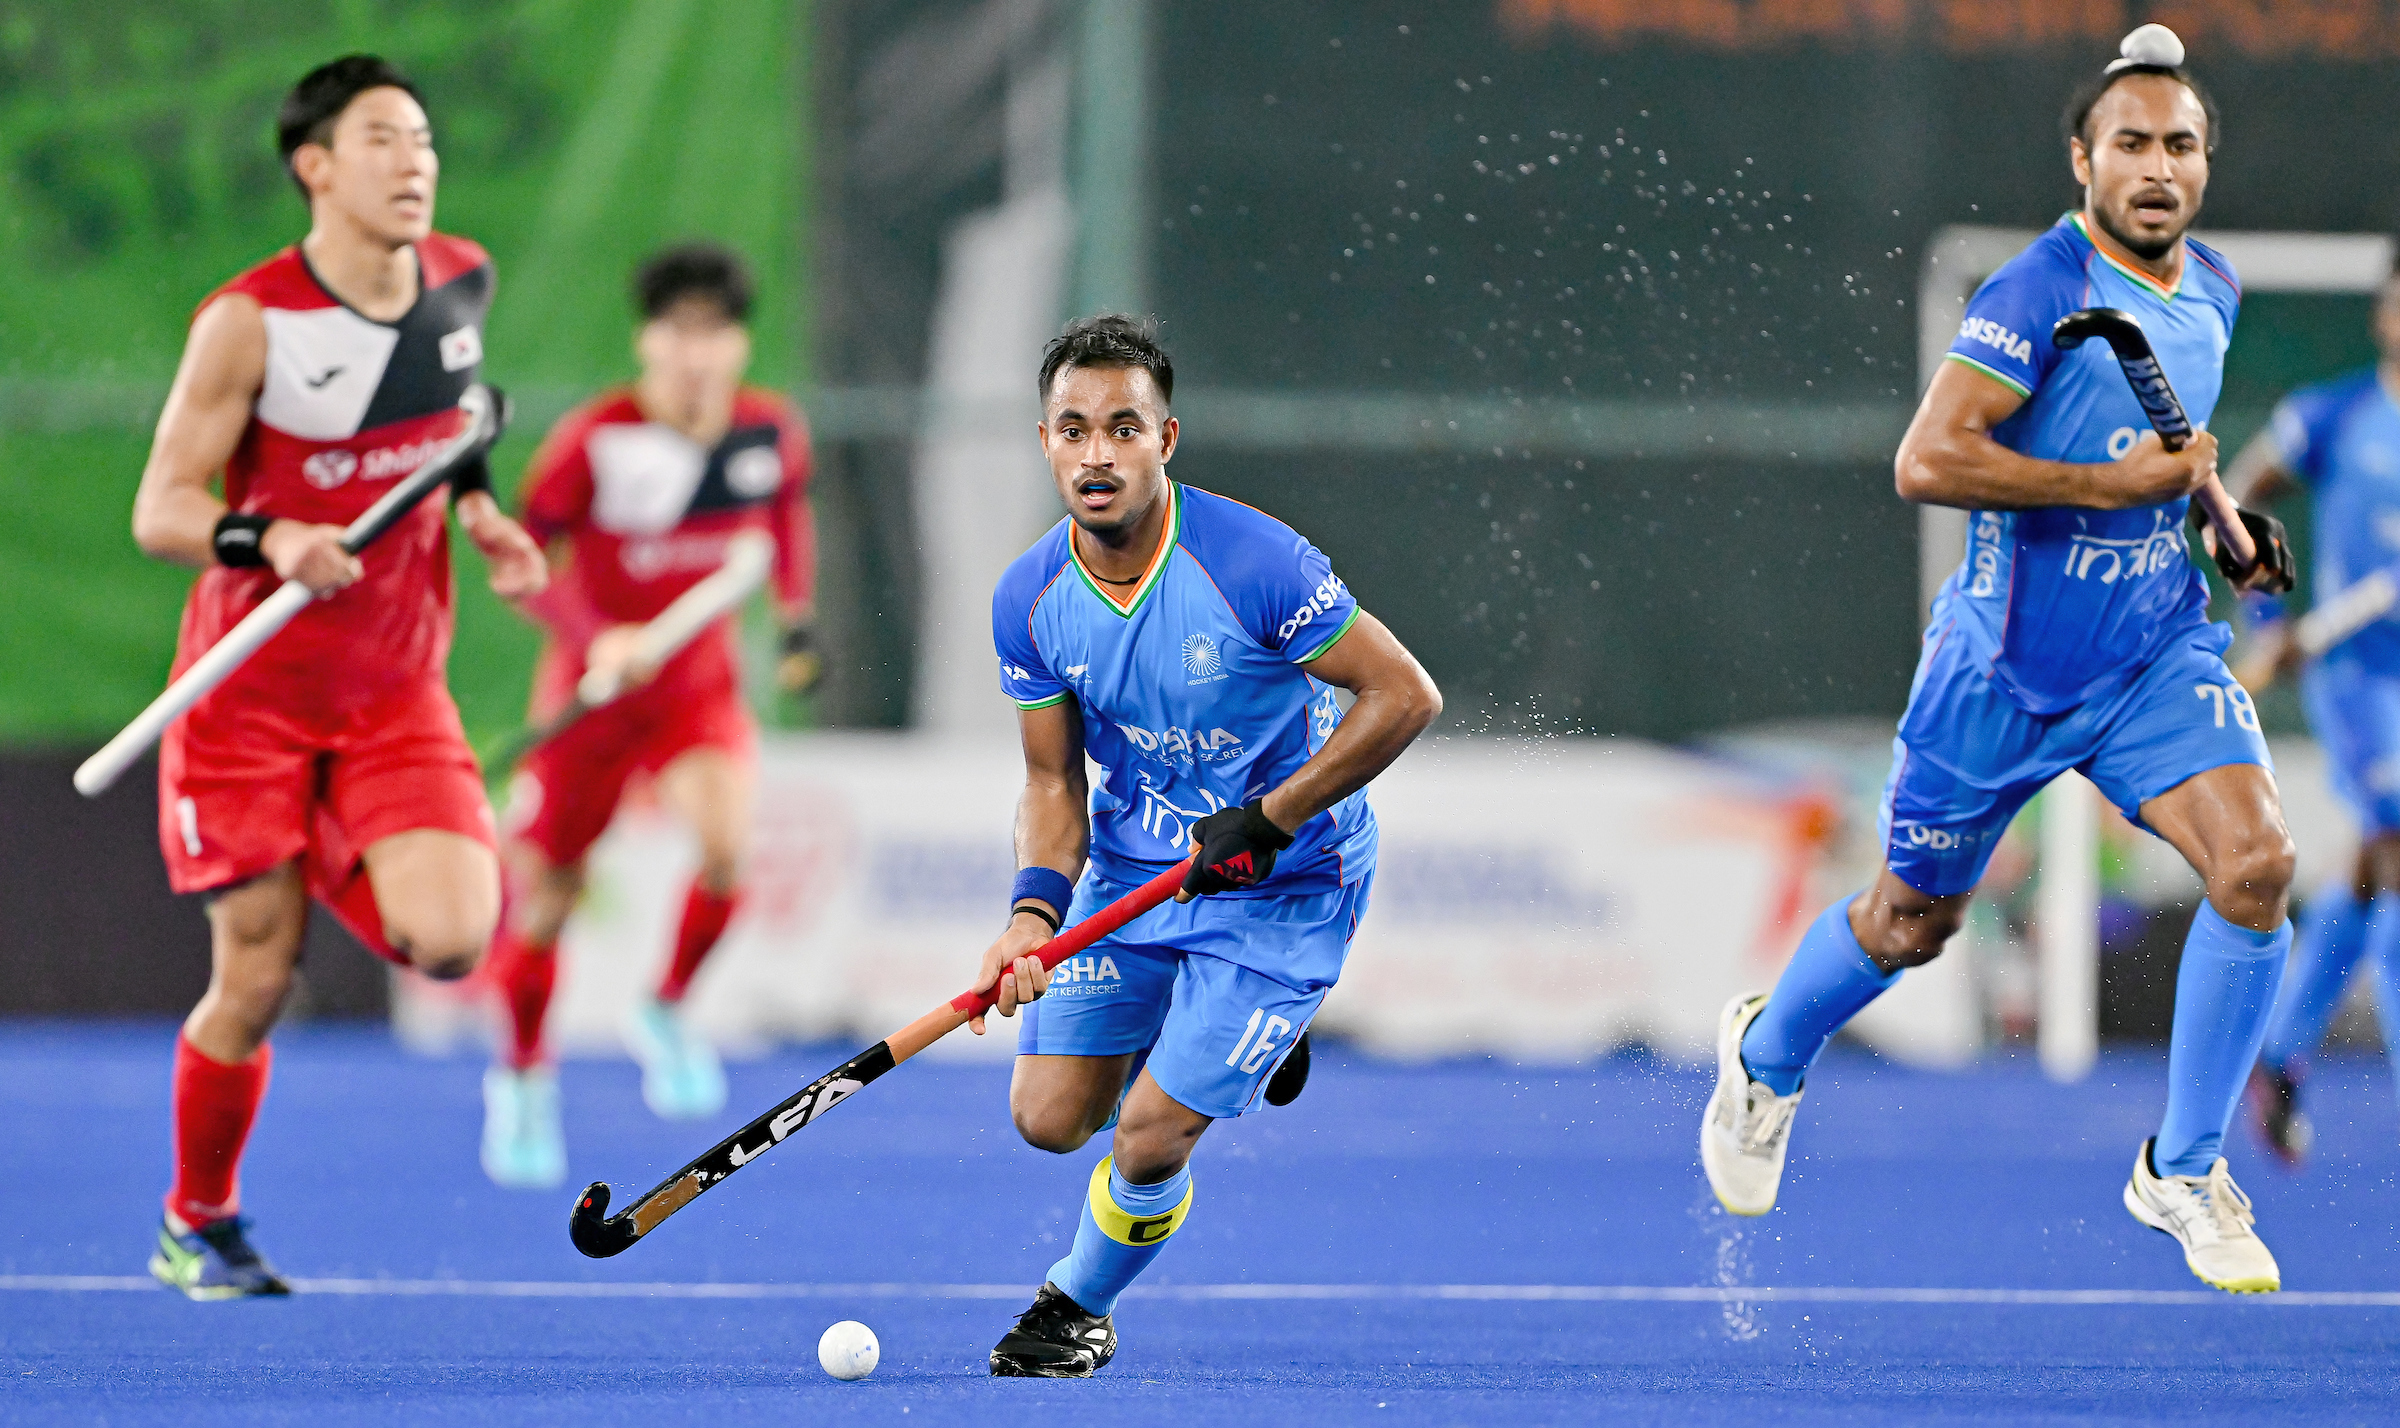 The semi-finals are served: India-USA and China-Russia